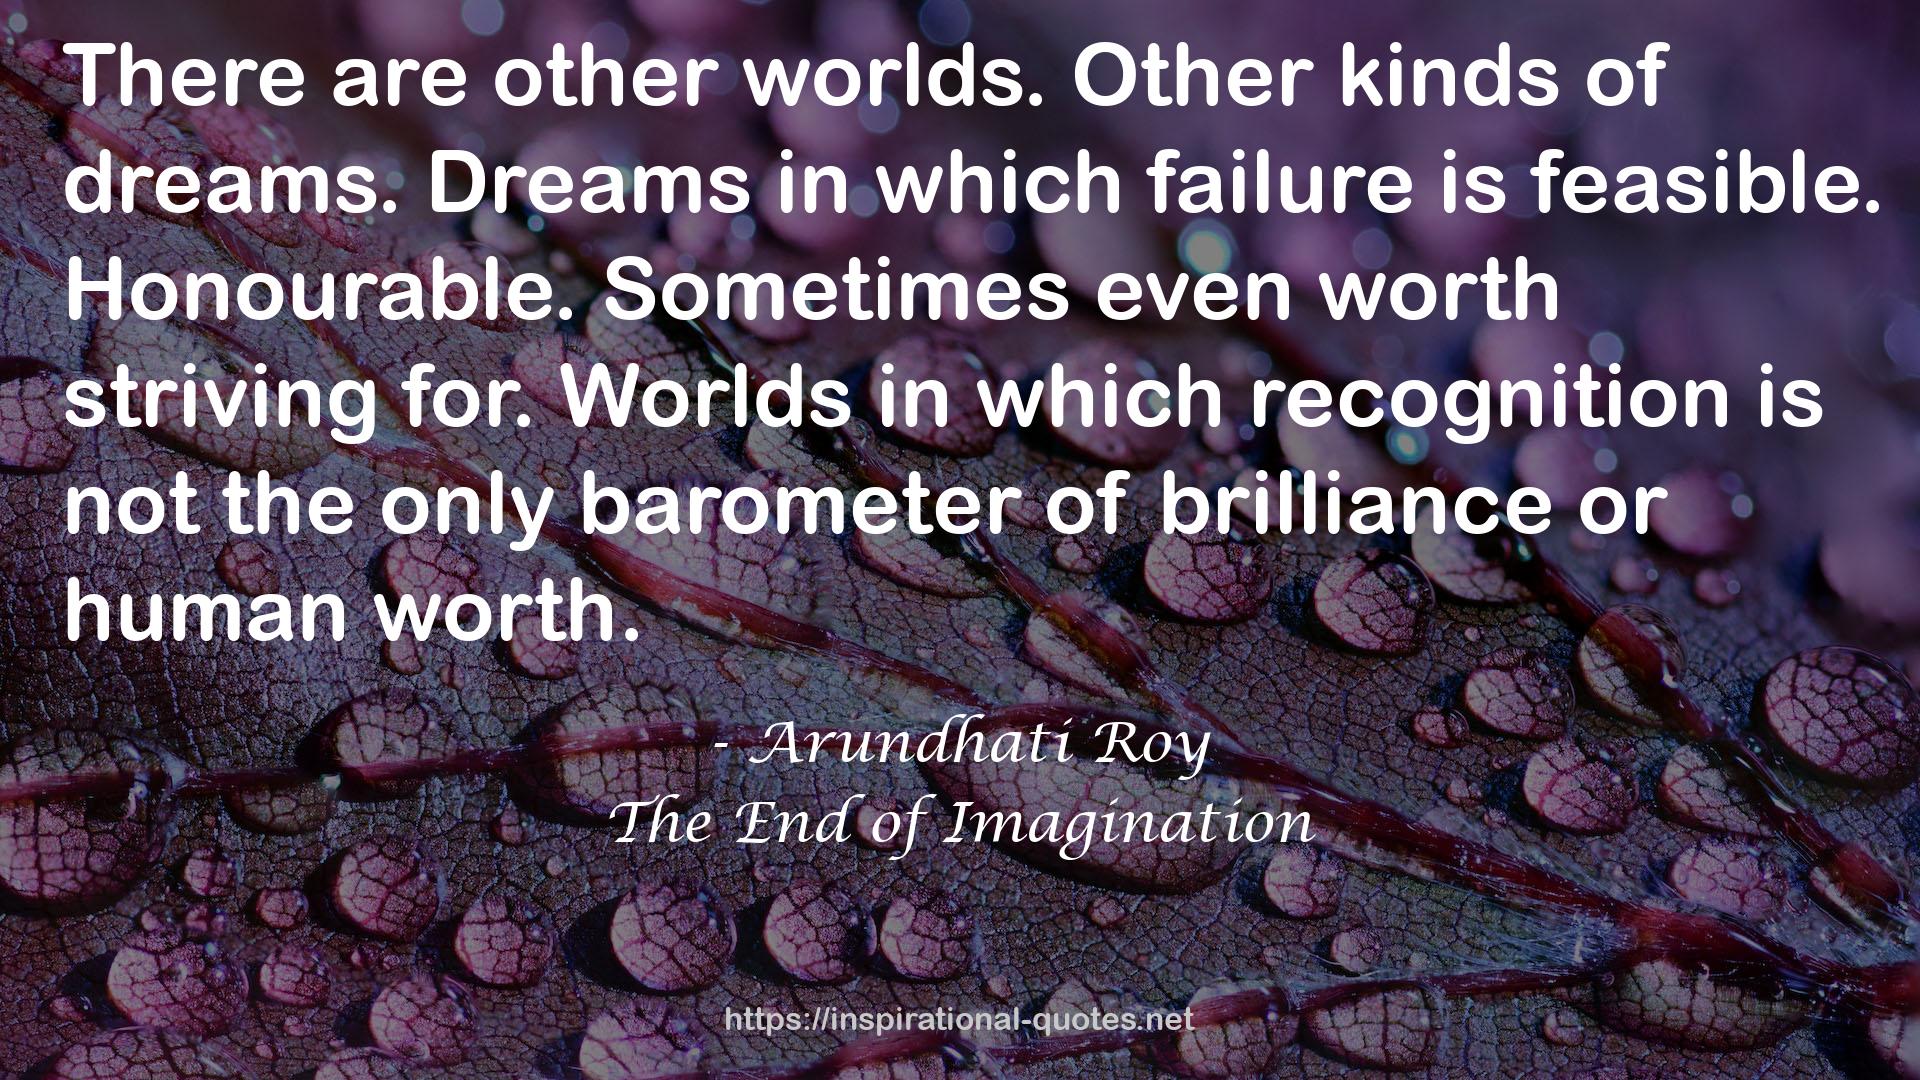 The End of Imagination QUOTES